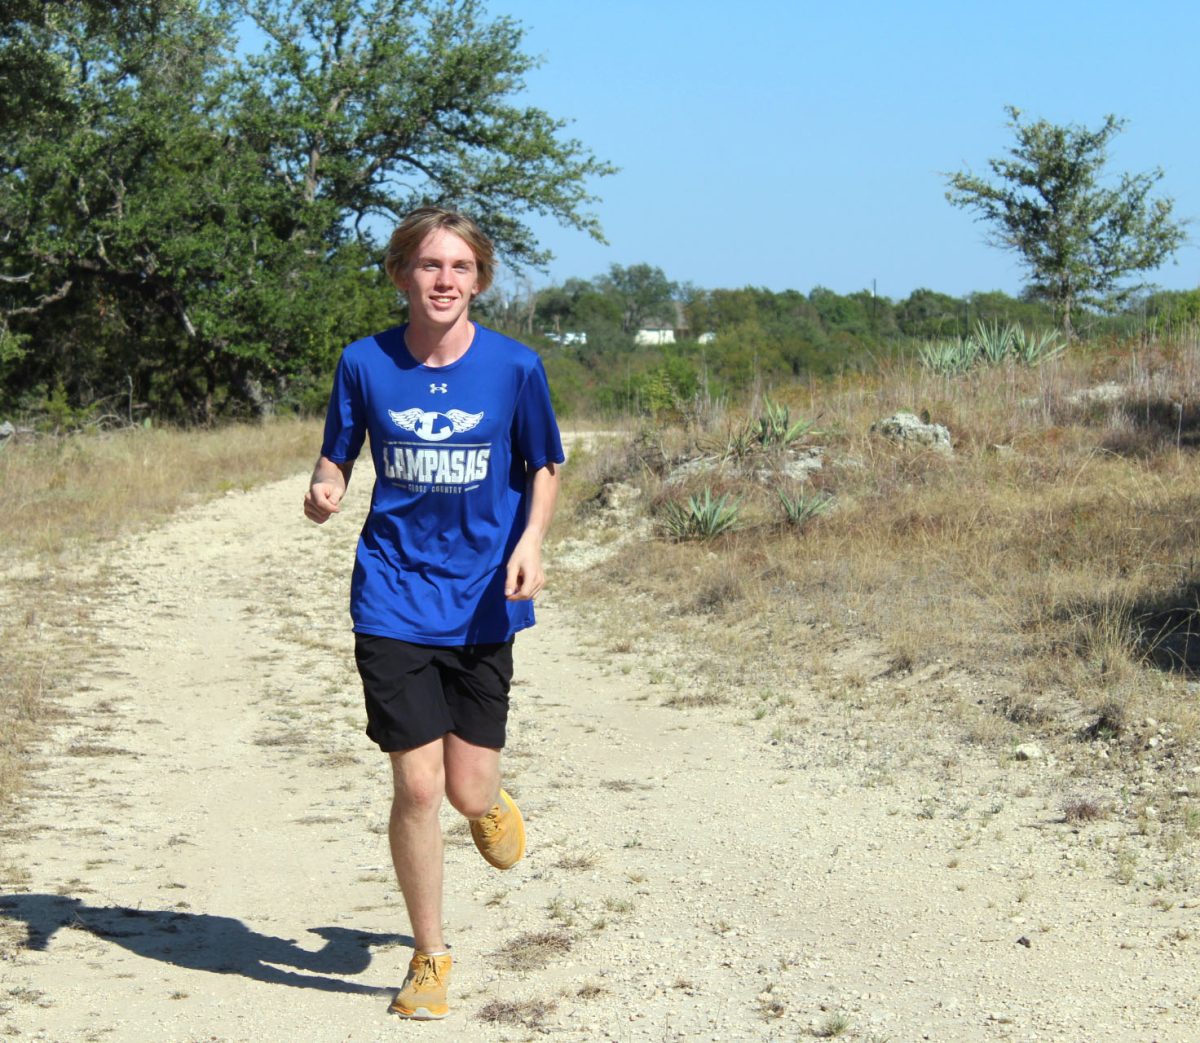 Junior+Brayden+Phillips+jogs+the+course+at+the+580+Sports+Complex+to+practice+for+the+Lampasas+home+meet.+